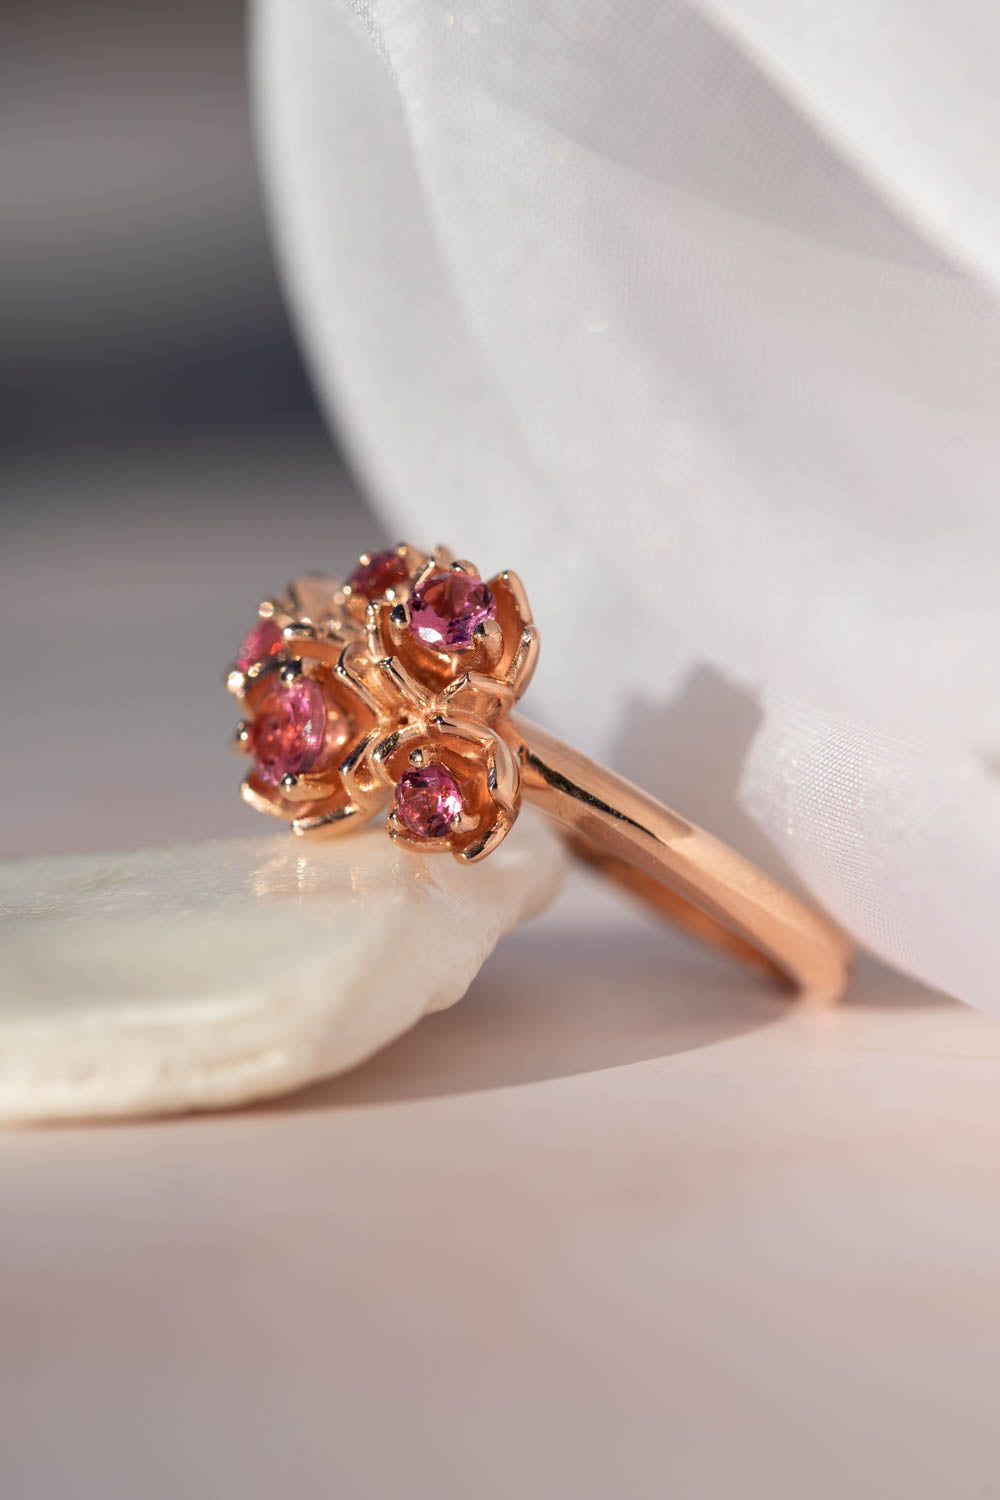 READY TO SHIP: Lily of the valley in 14K rose gold, natural pink tourmalines, RING SIZE 6 US - Eden Garden Jewelry™